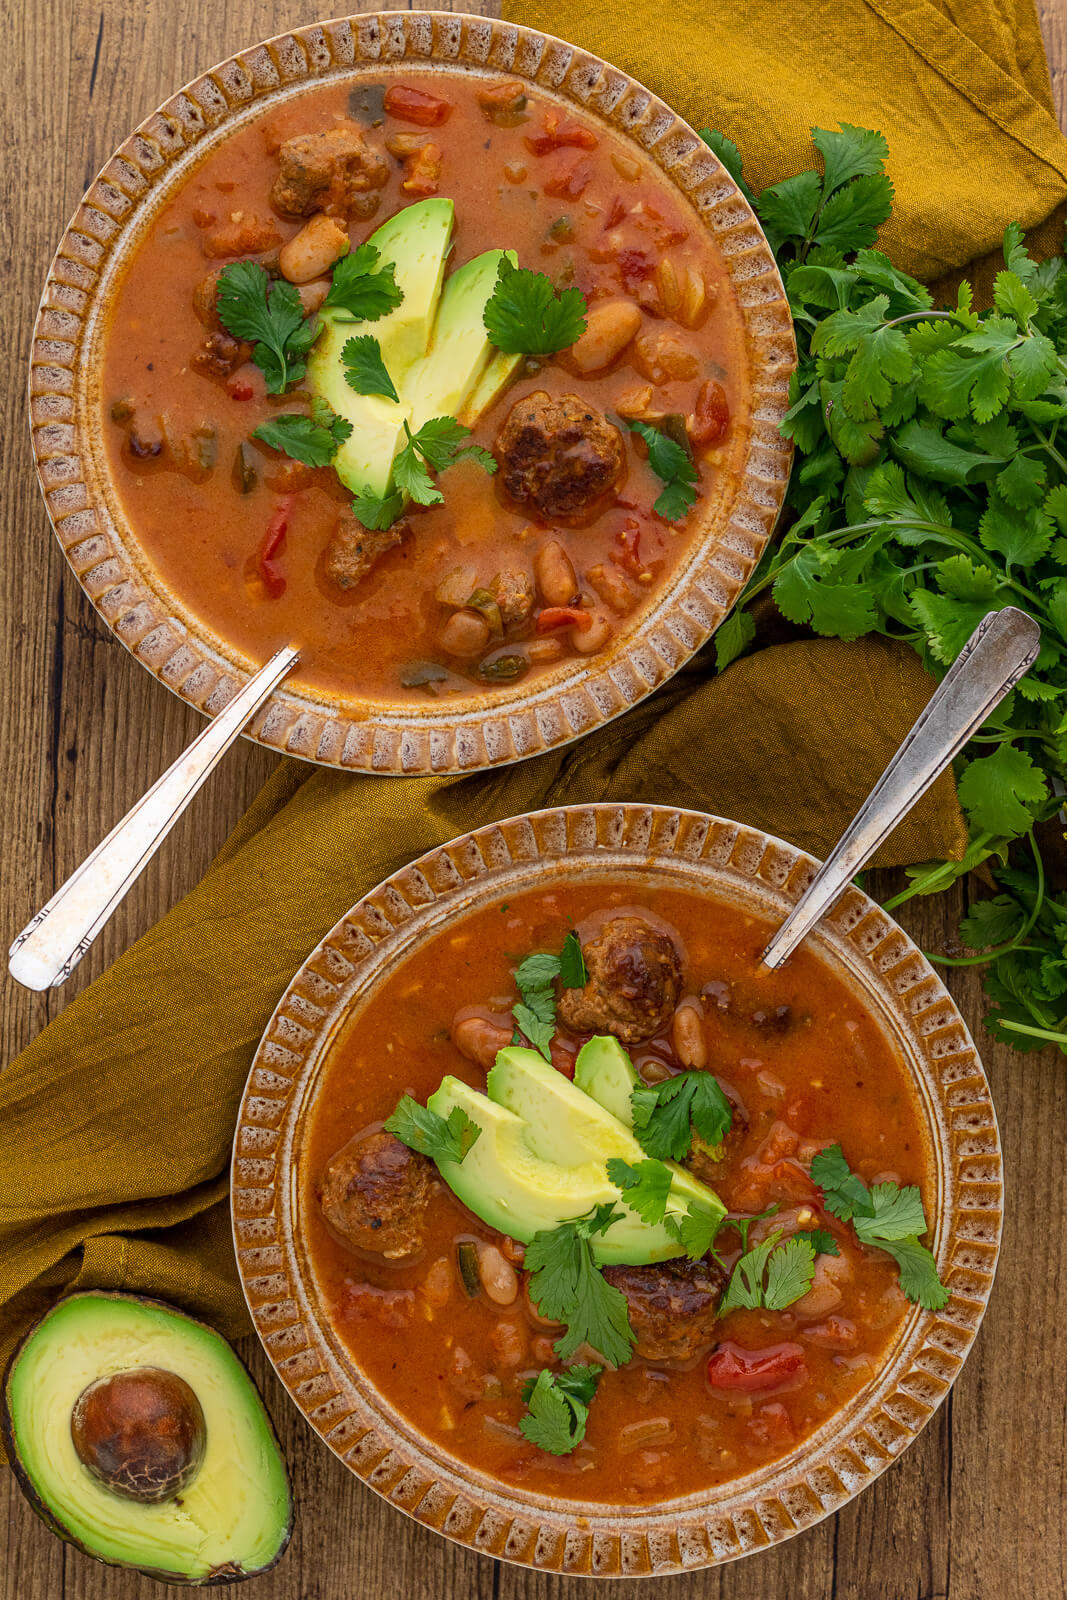 Two inviting bowls of spicy Pinto Bean Soup garnished with sliced avocado and fresh cilantro.